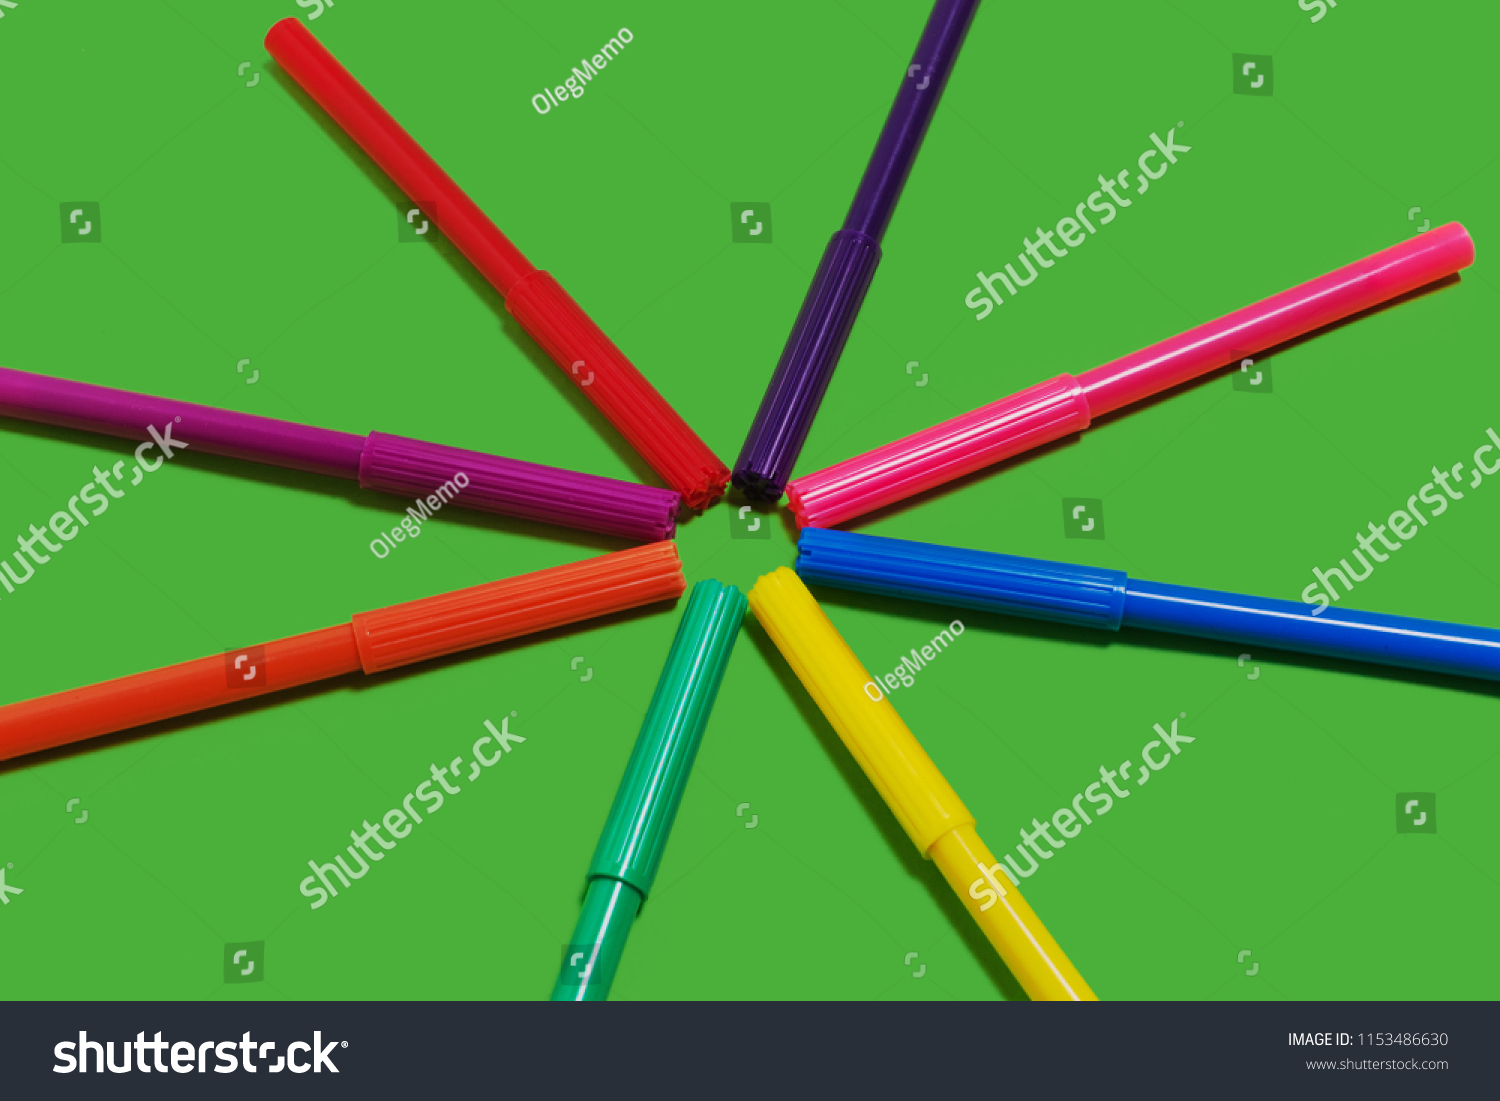 collection of new bright plastic colored felt pens lying cap to cap forming a circle on a green background. concept of office supplies #1153486630